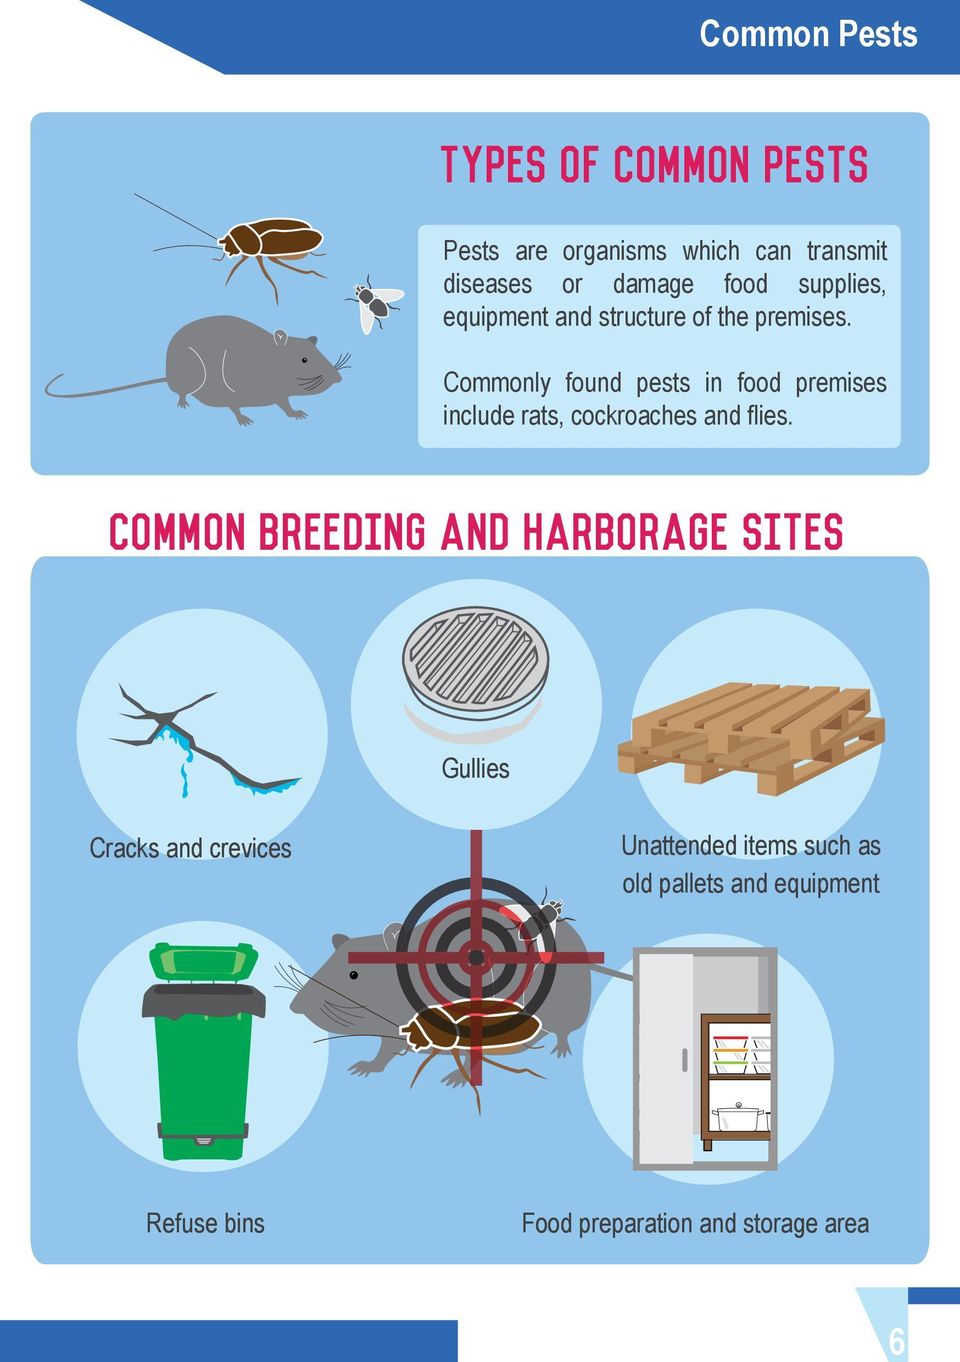 Commonly found pests in food premises include rats, cockroaches and flies.